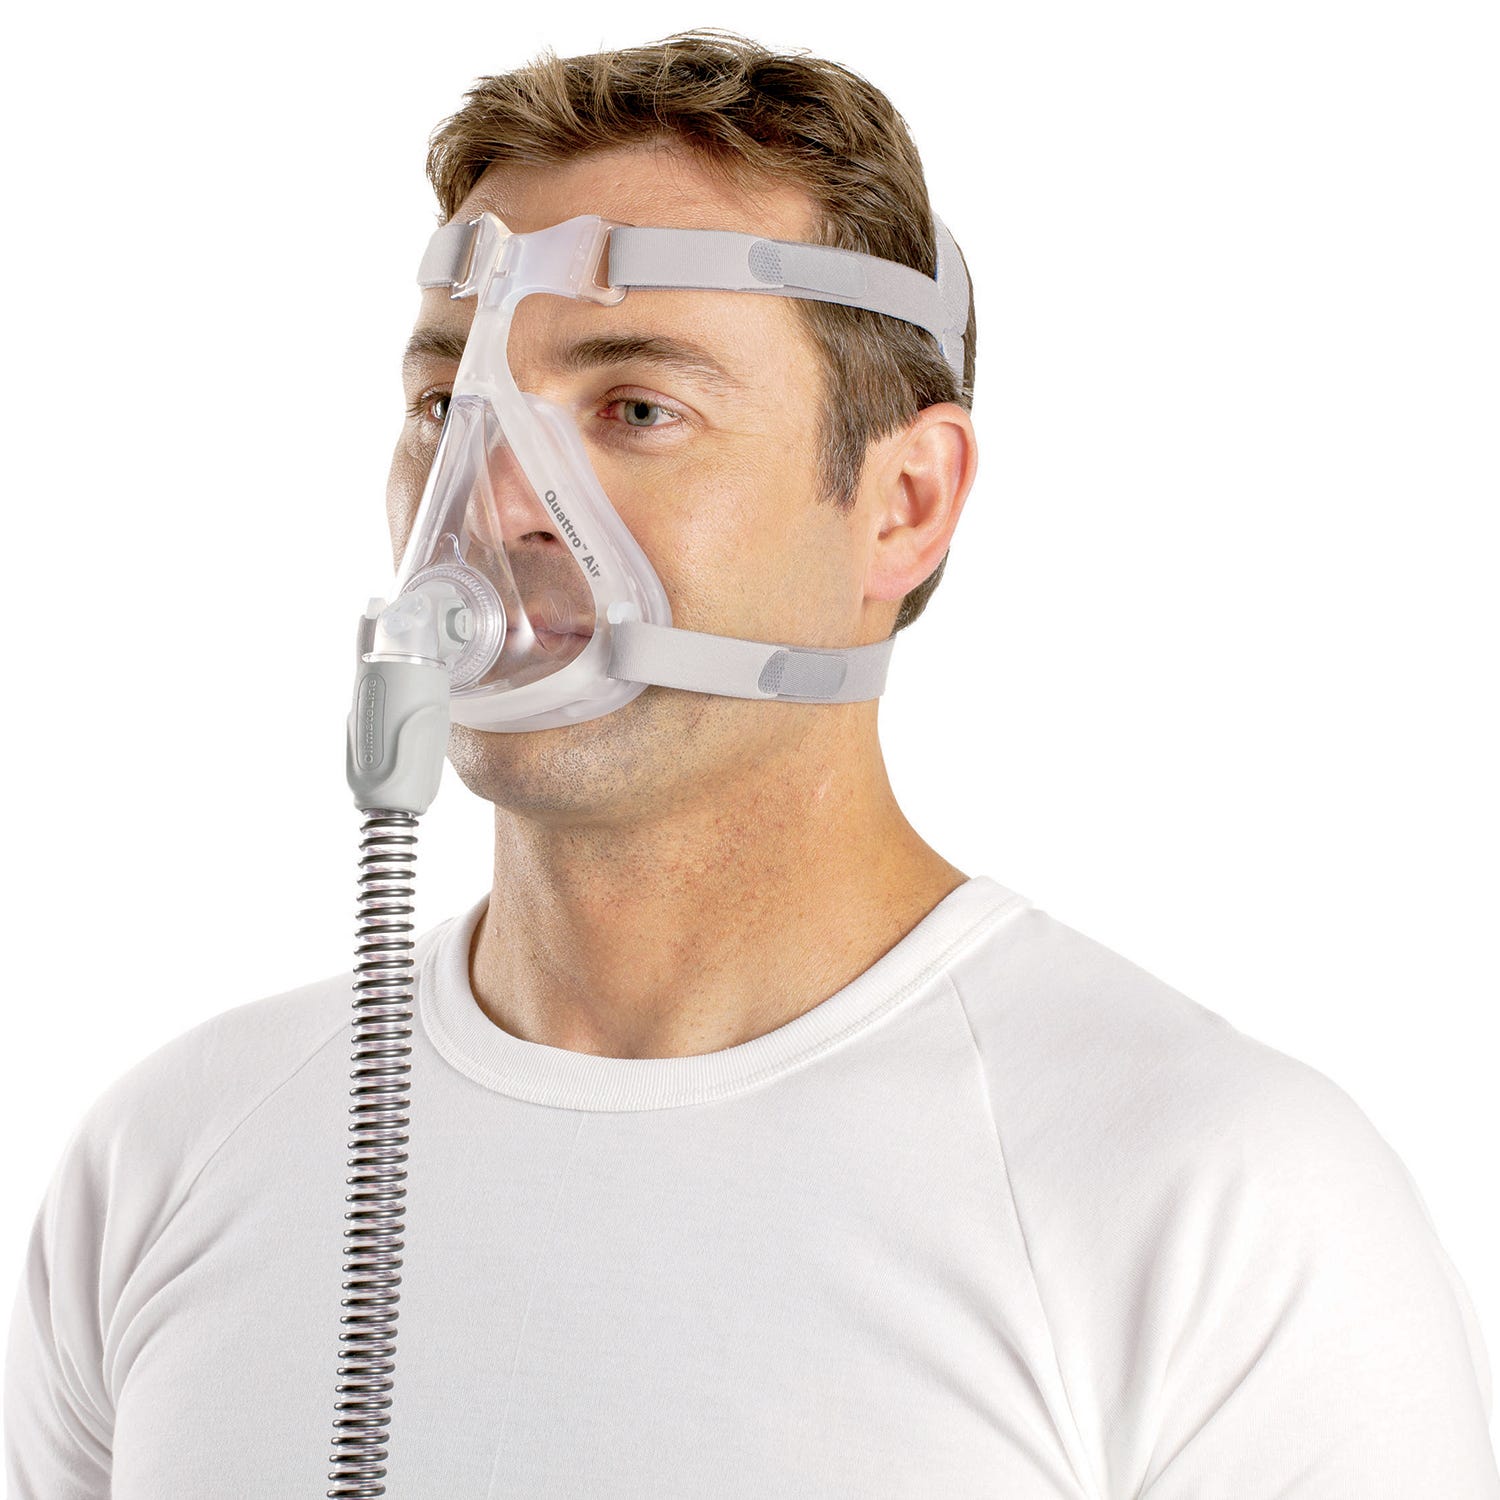 New Cpap Mask The Resmed Airfit N20